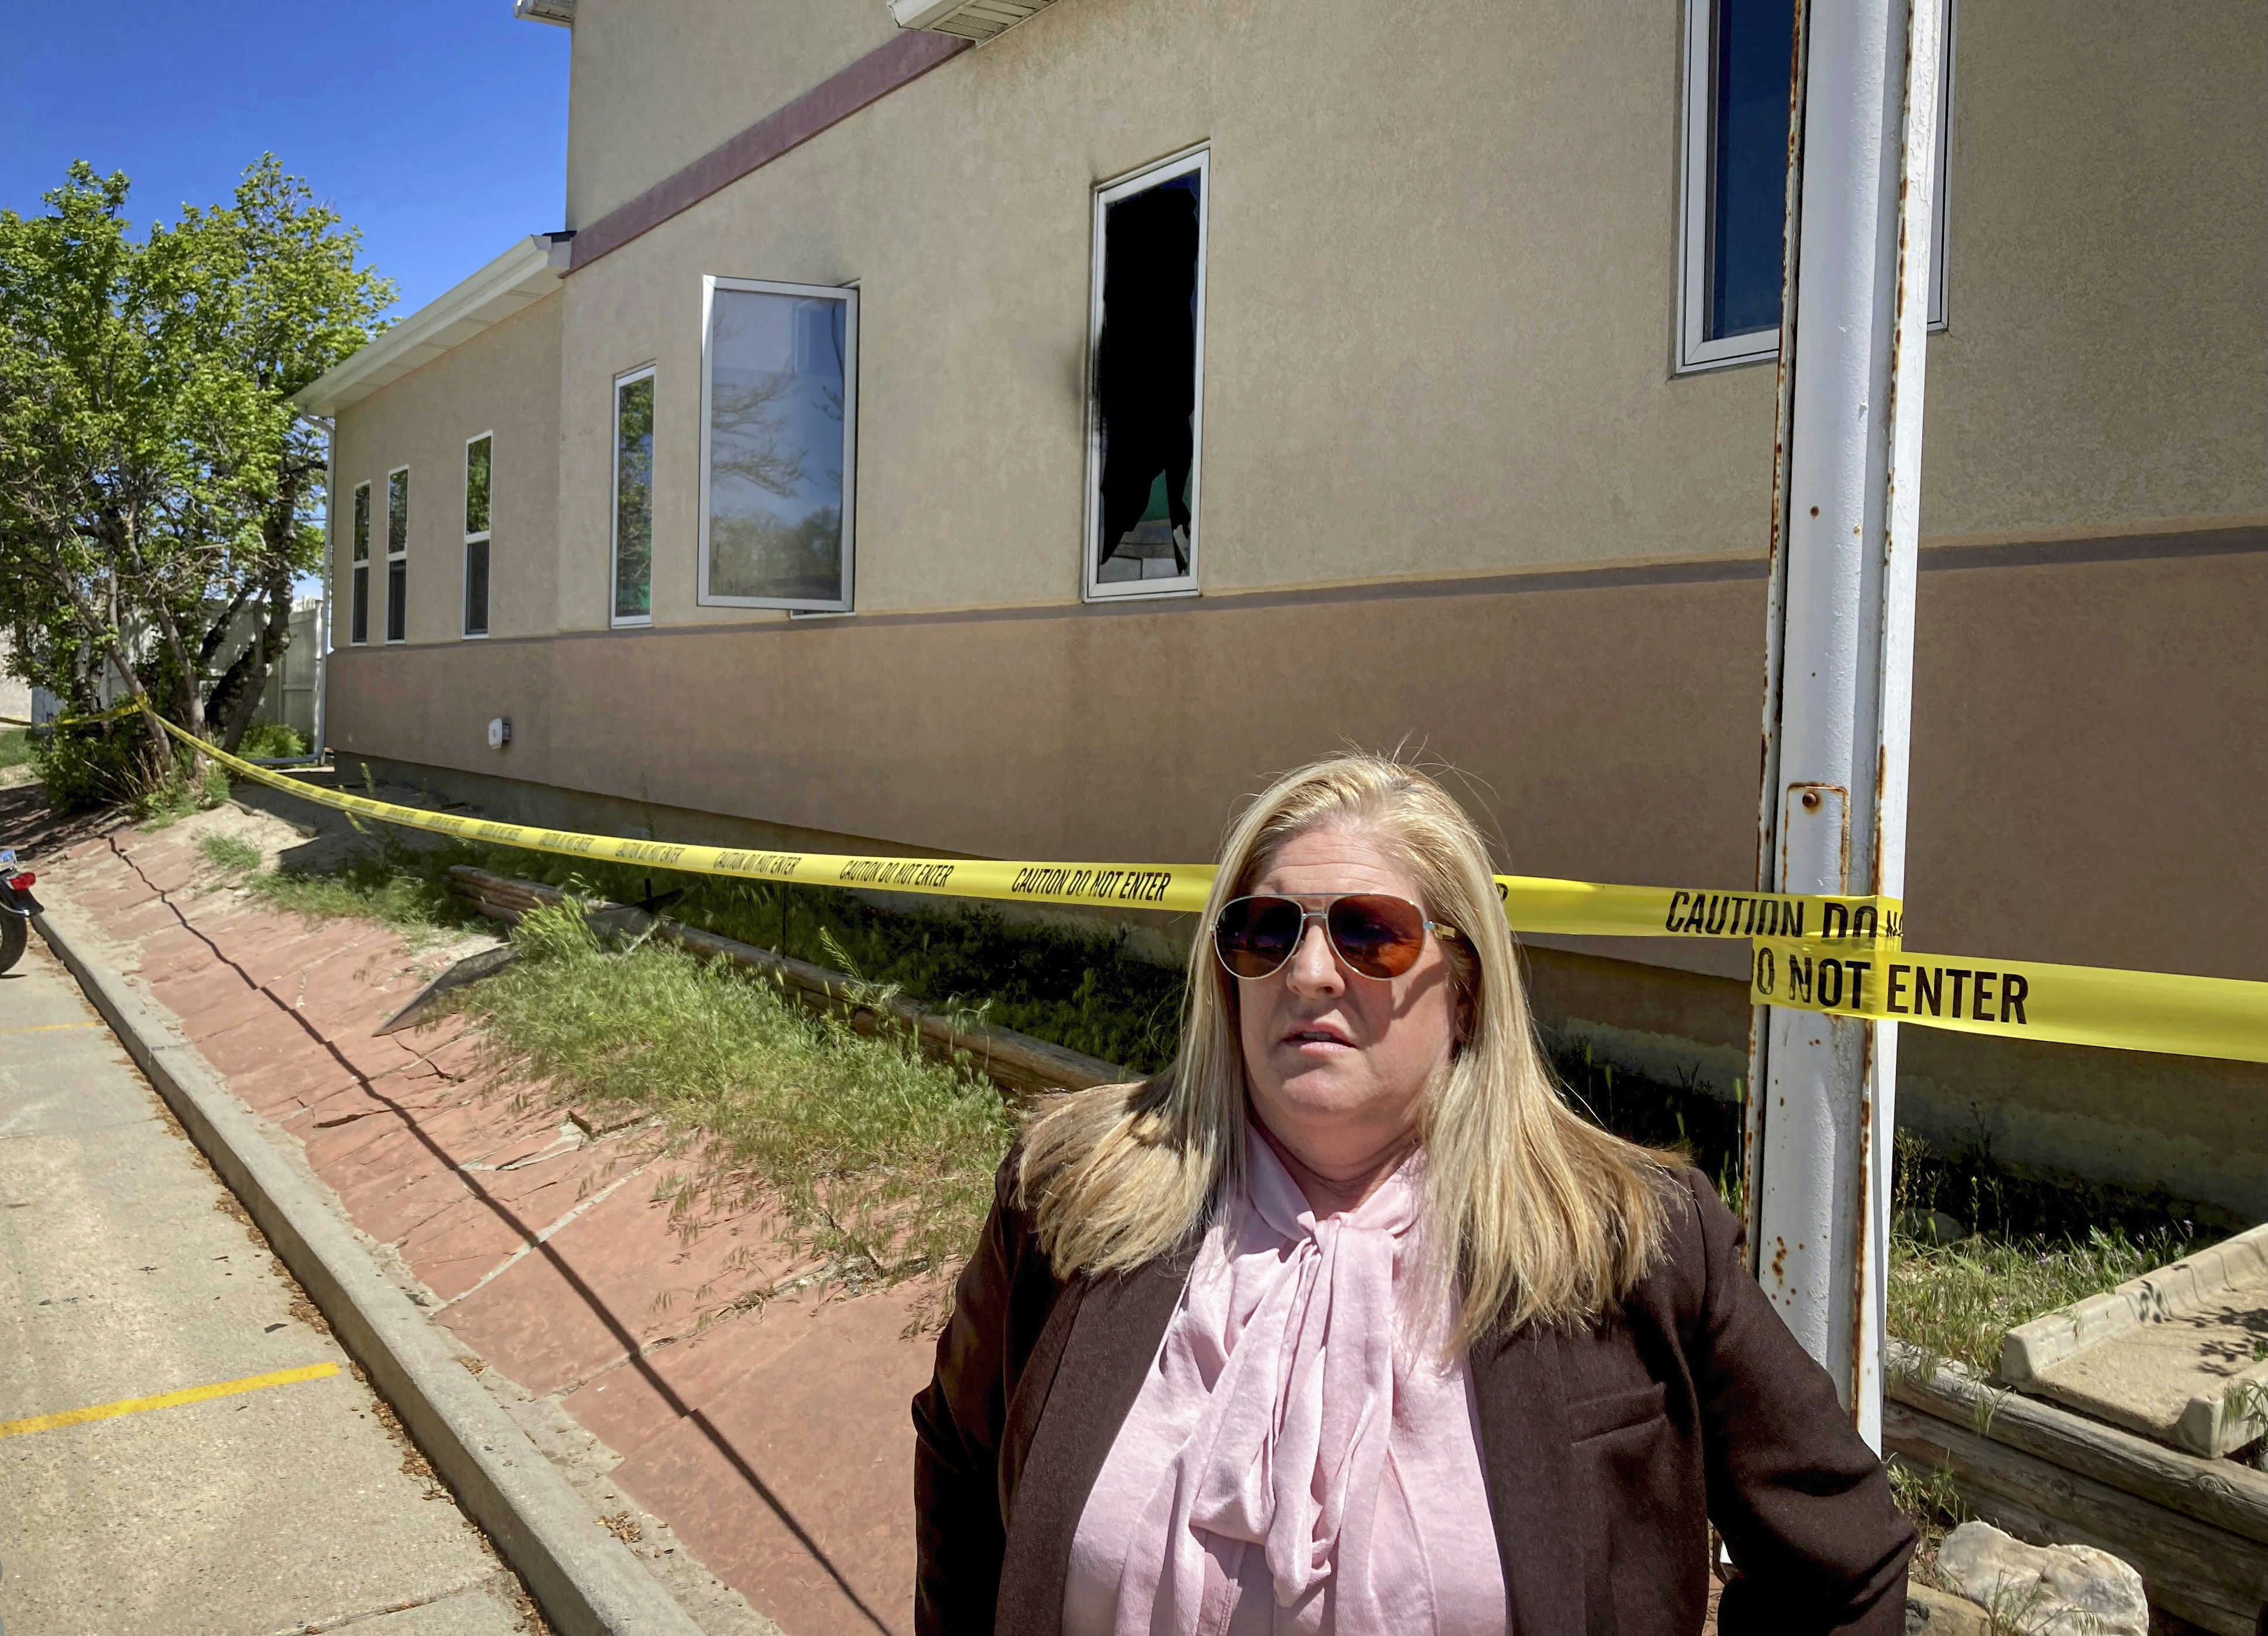 Julie Burkhart, founder of the Wellspring Health Access clinic in Casper, Wyo., stands outside the clinic on Thursday, May 26, 2022. The women's health and abortion clinic, which would be the only one of its kind in the state, was set to open in mid-June but an arson fire has delayed the opening by at least several weeks. (AP Photo/Mead Gruver)